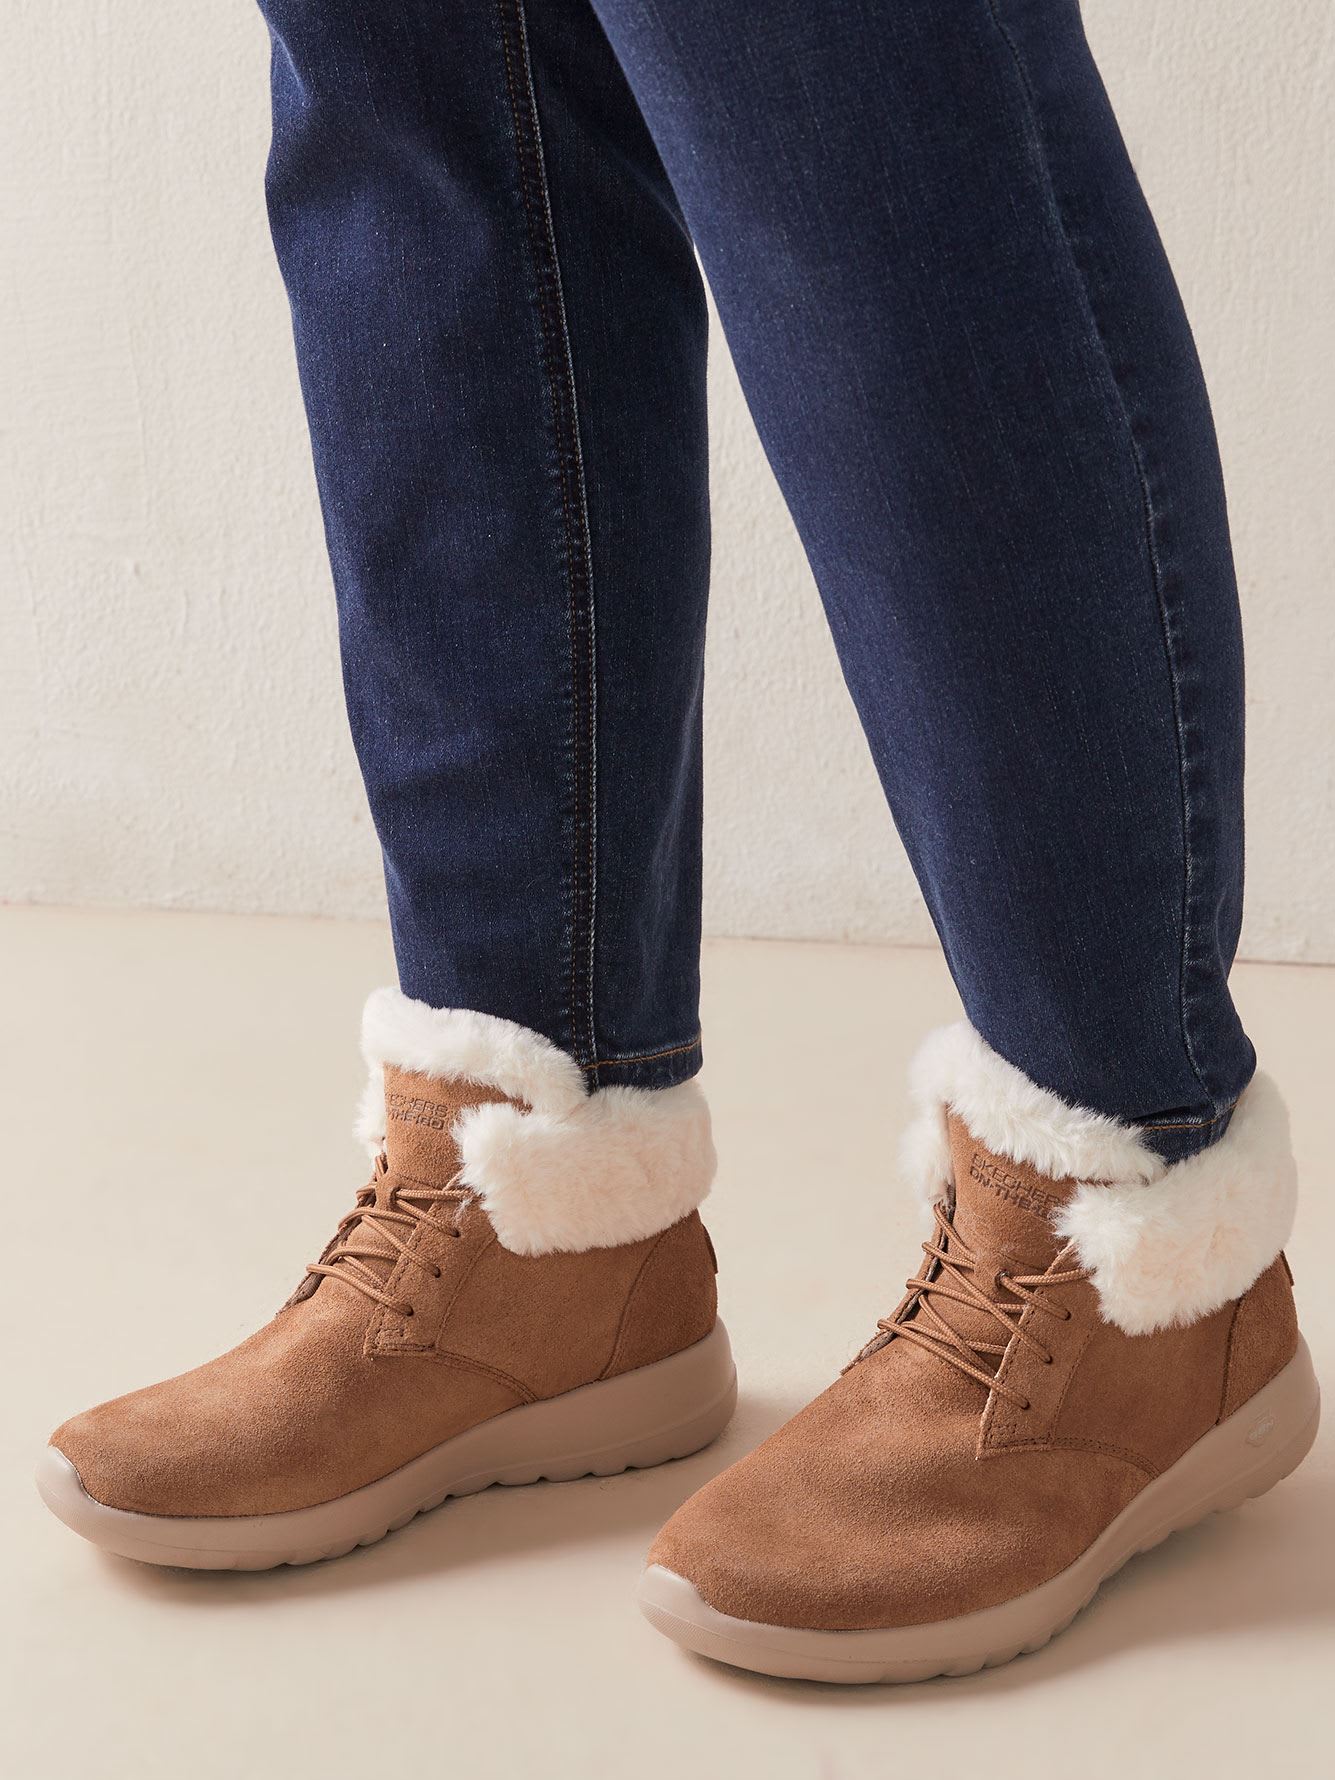 skechers on the go joy boots lace up